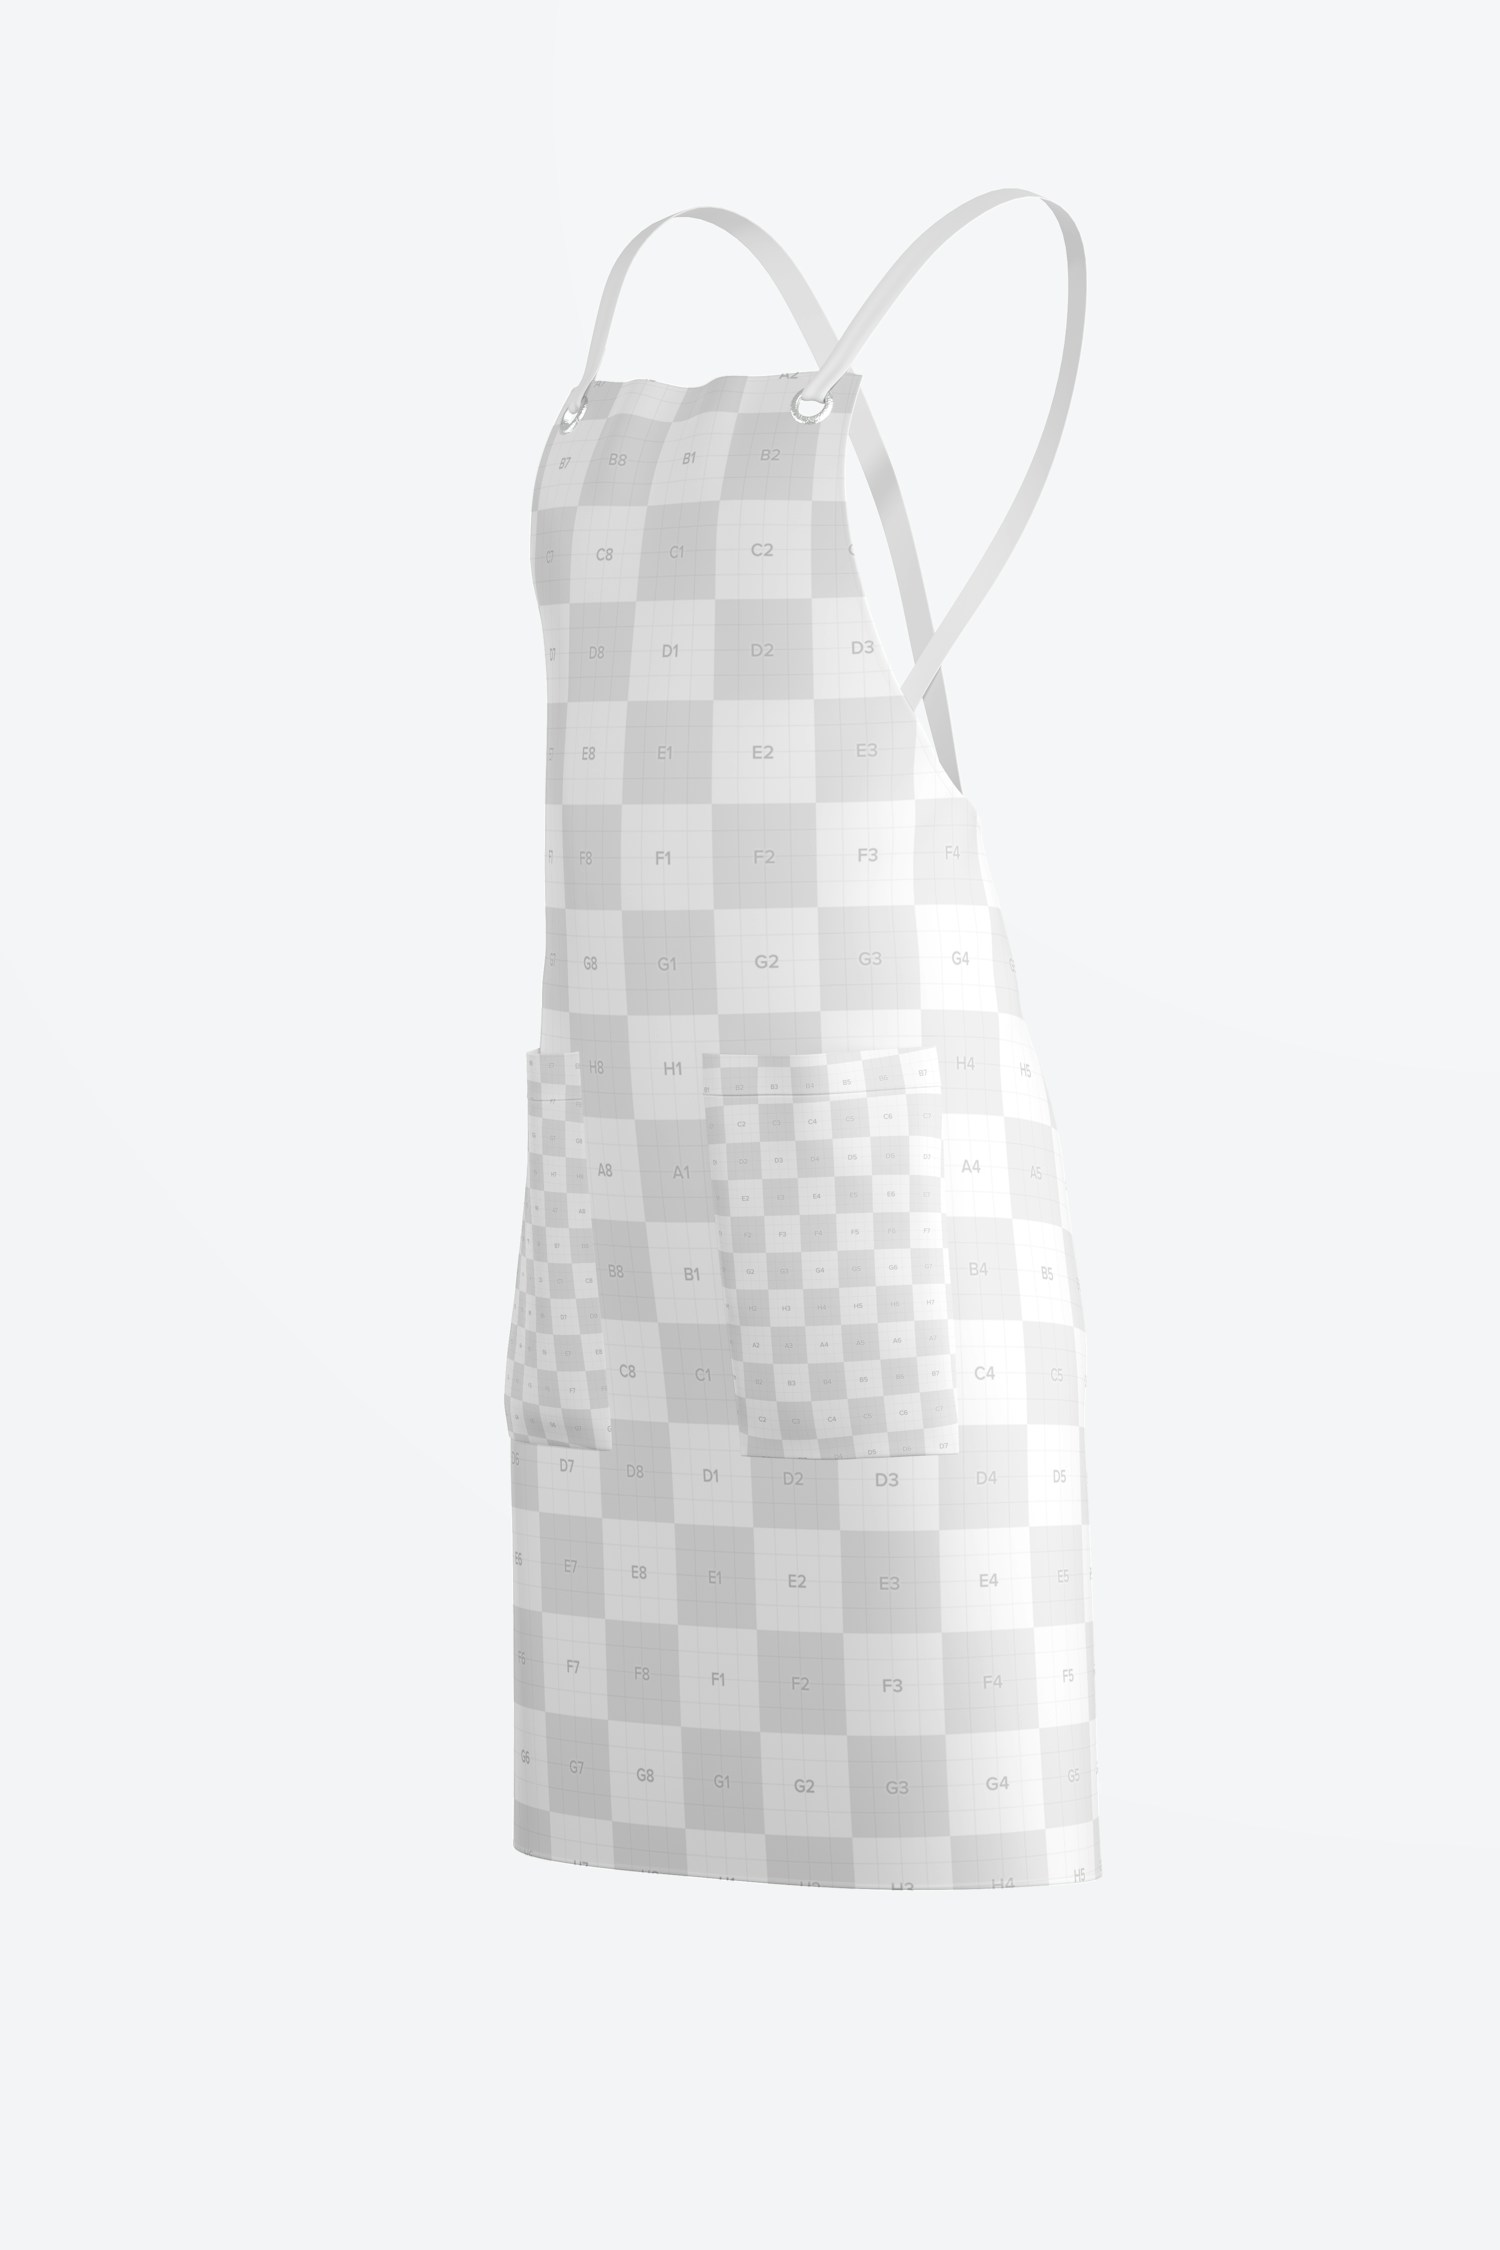 Show your design on the apron.